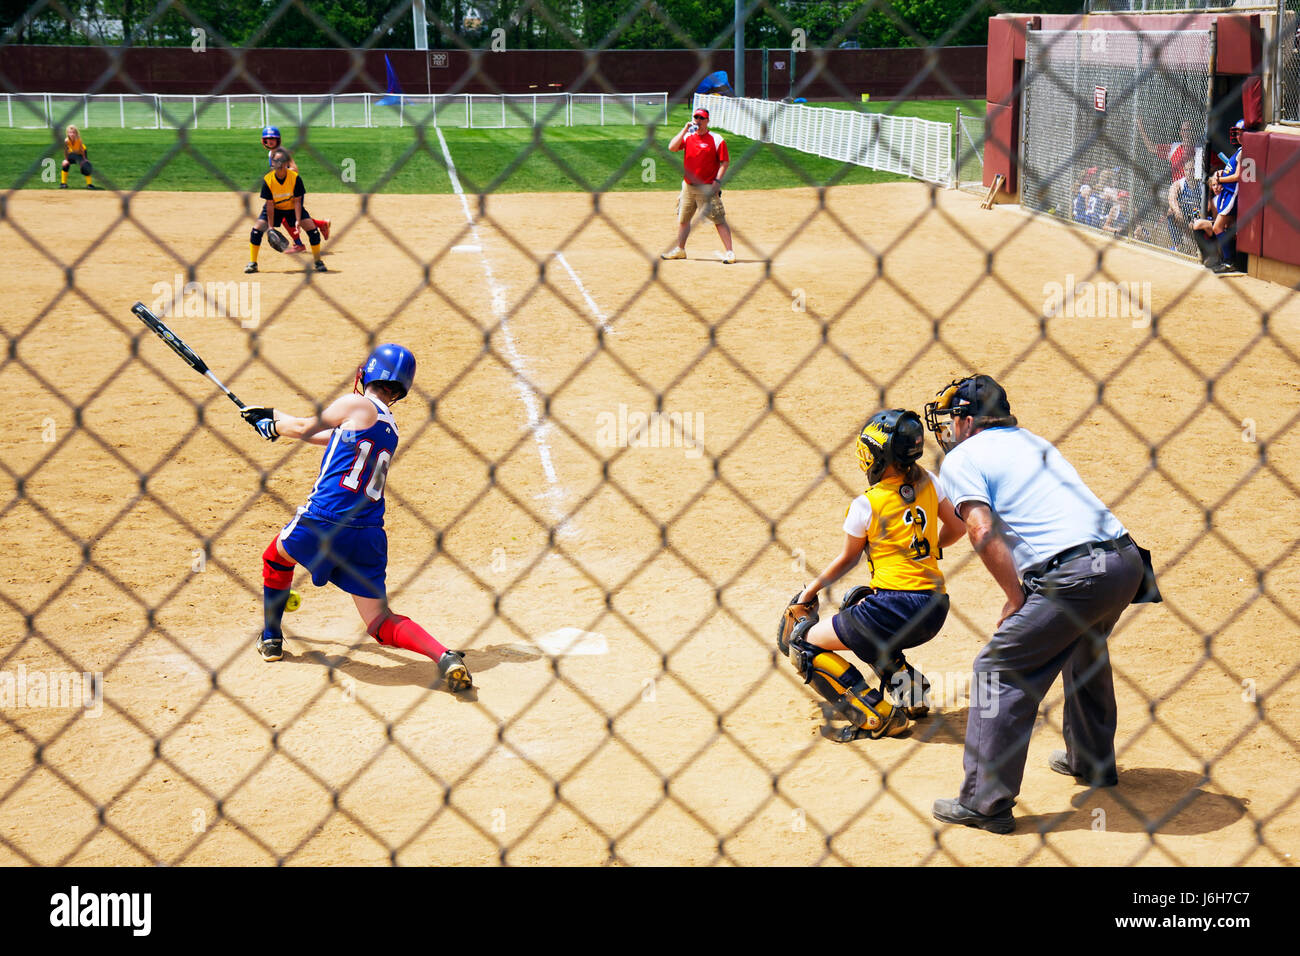 Virginia Salem,Moyer Sports Complex,baseball fields,diamond,girl girls,youngster youngsters youth youths female kid kids child children,softball game, Stock Photo